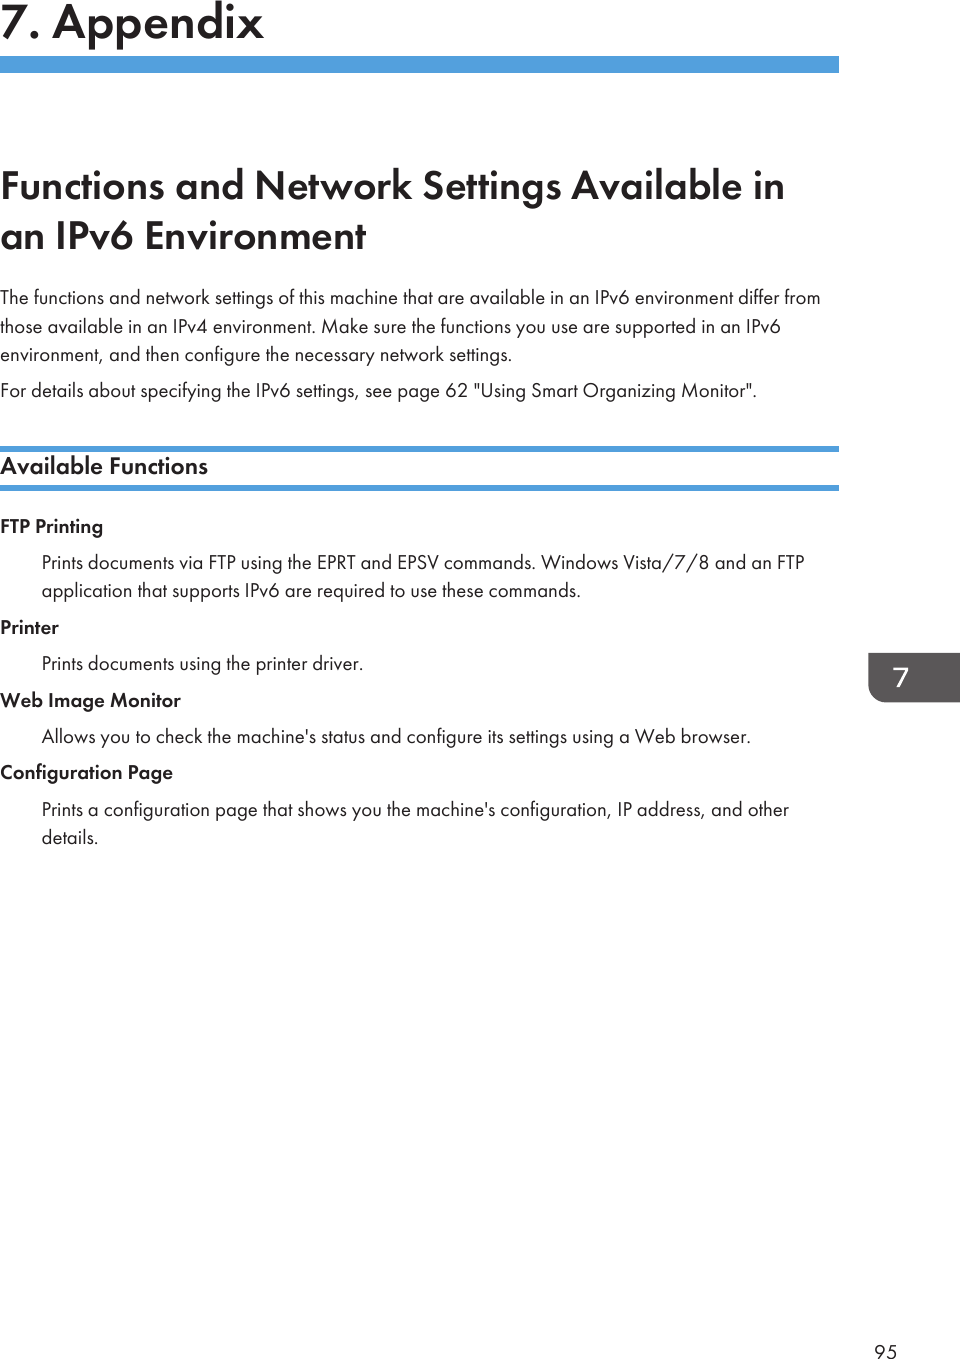 7. AppendixFunctions and Network Settings Available inan IPv6 EnvironmentThe functions and network settings of this machine that are available in an IPv6 environment differ fromthose available in an IPv4 environment. Make sure the functions you use are supported in an IPv6environment, and then configure the necessary network settings.For details about specifying the IPv6 settings, see page 62 &quot;Using Smart Organizing Monitor&quot;.Available FunctionsFTP PrintingPrints documents via FTP using the EPRT and EPSV commands. Windows Vista/7/8 and an FTPapplication that supports IPv6 are required to use these commands.PrinterPrints documents using the printer driver.Web Image MonitorAllows you to check the machine&apos;s status and configure its settings using a Web browser.Configuration PagePrints a configuration page that shows you the machine&apos;s configuration, IP address, and otherdetails.95